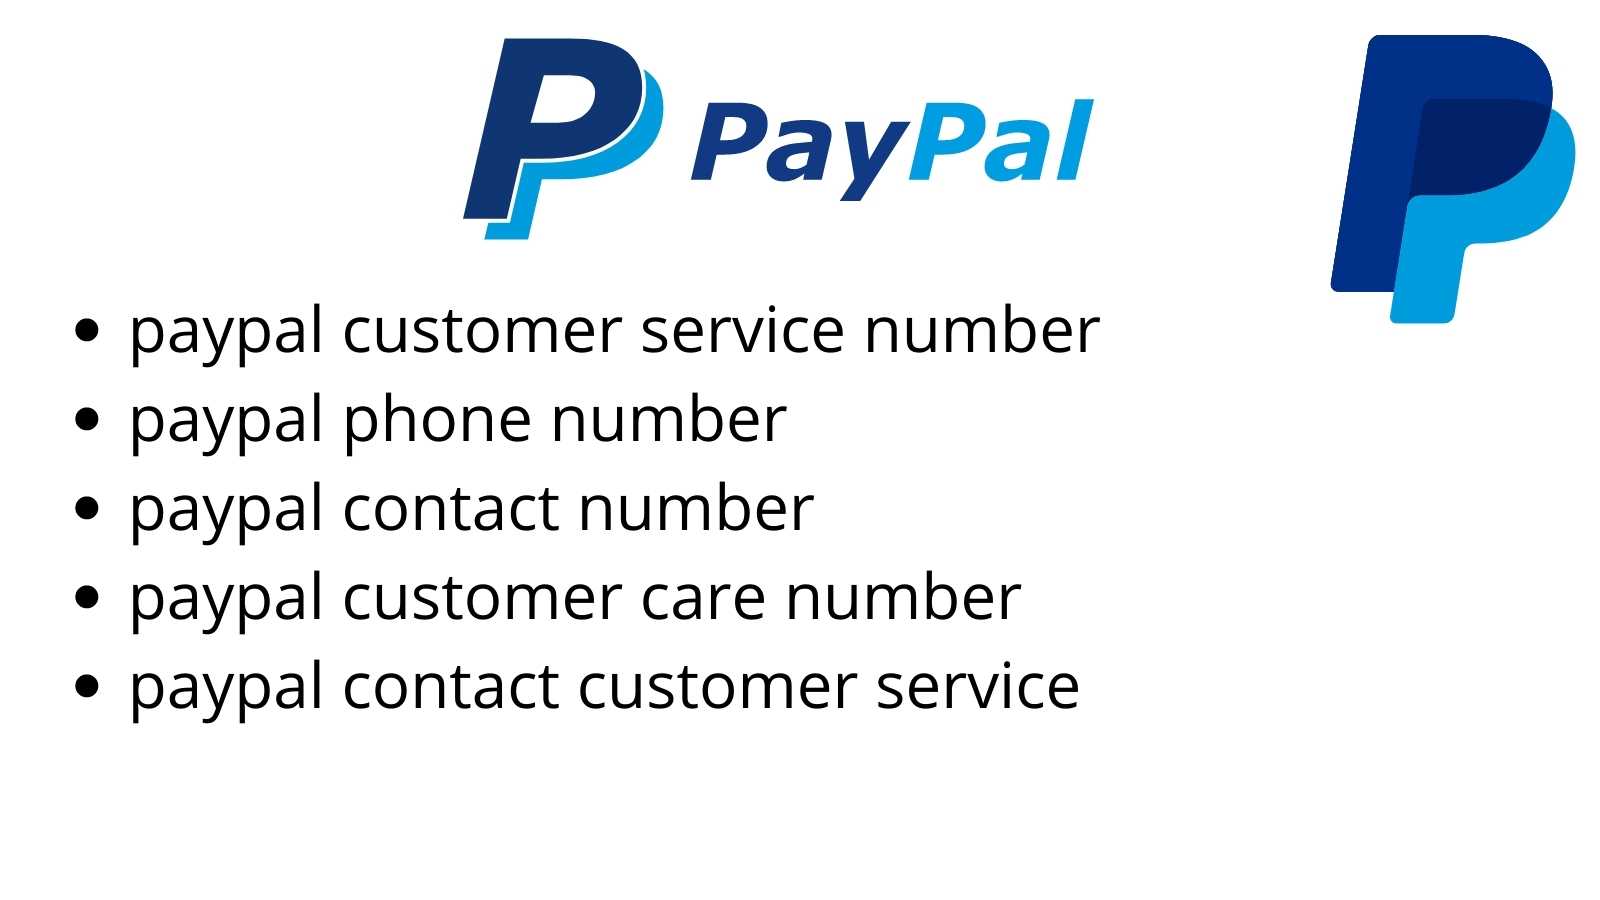 PayPal Customer Service Number